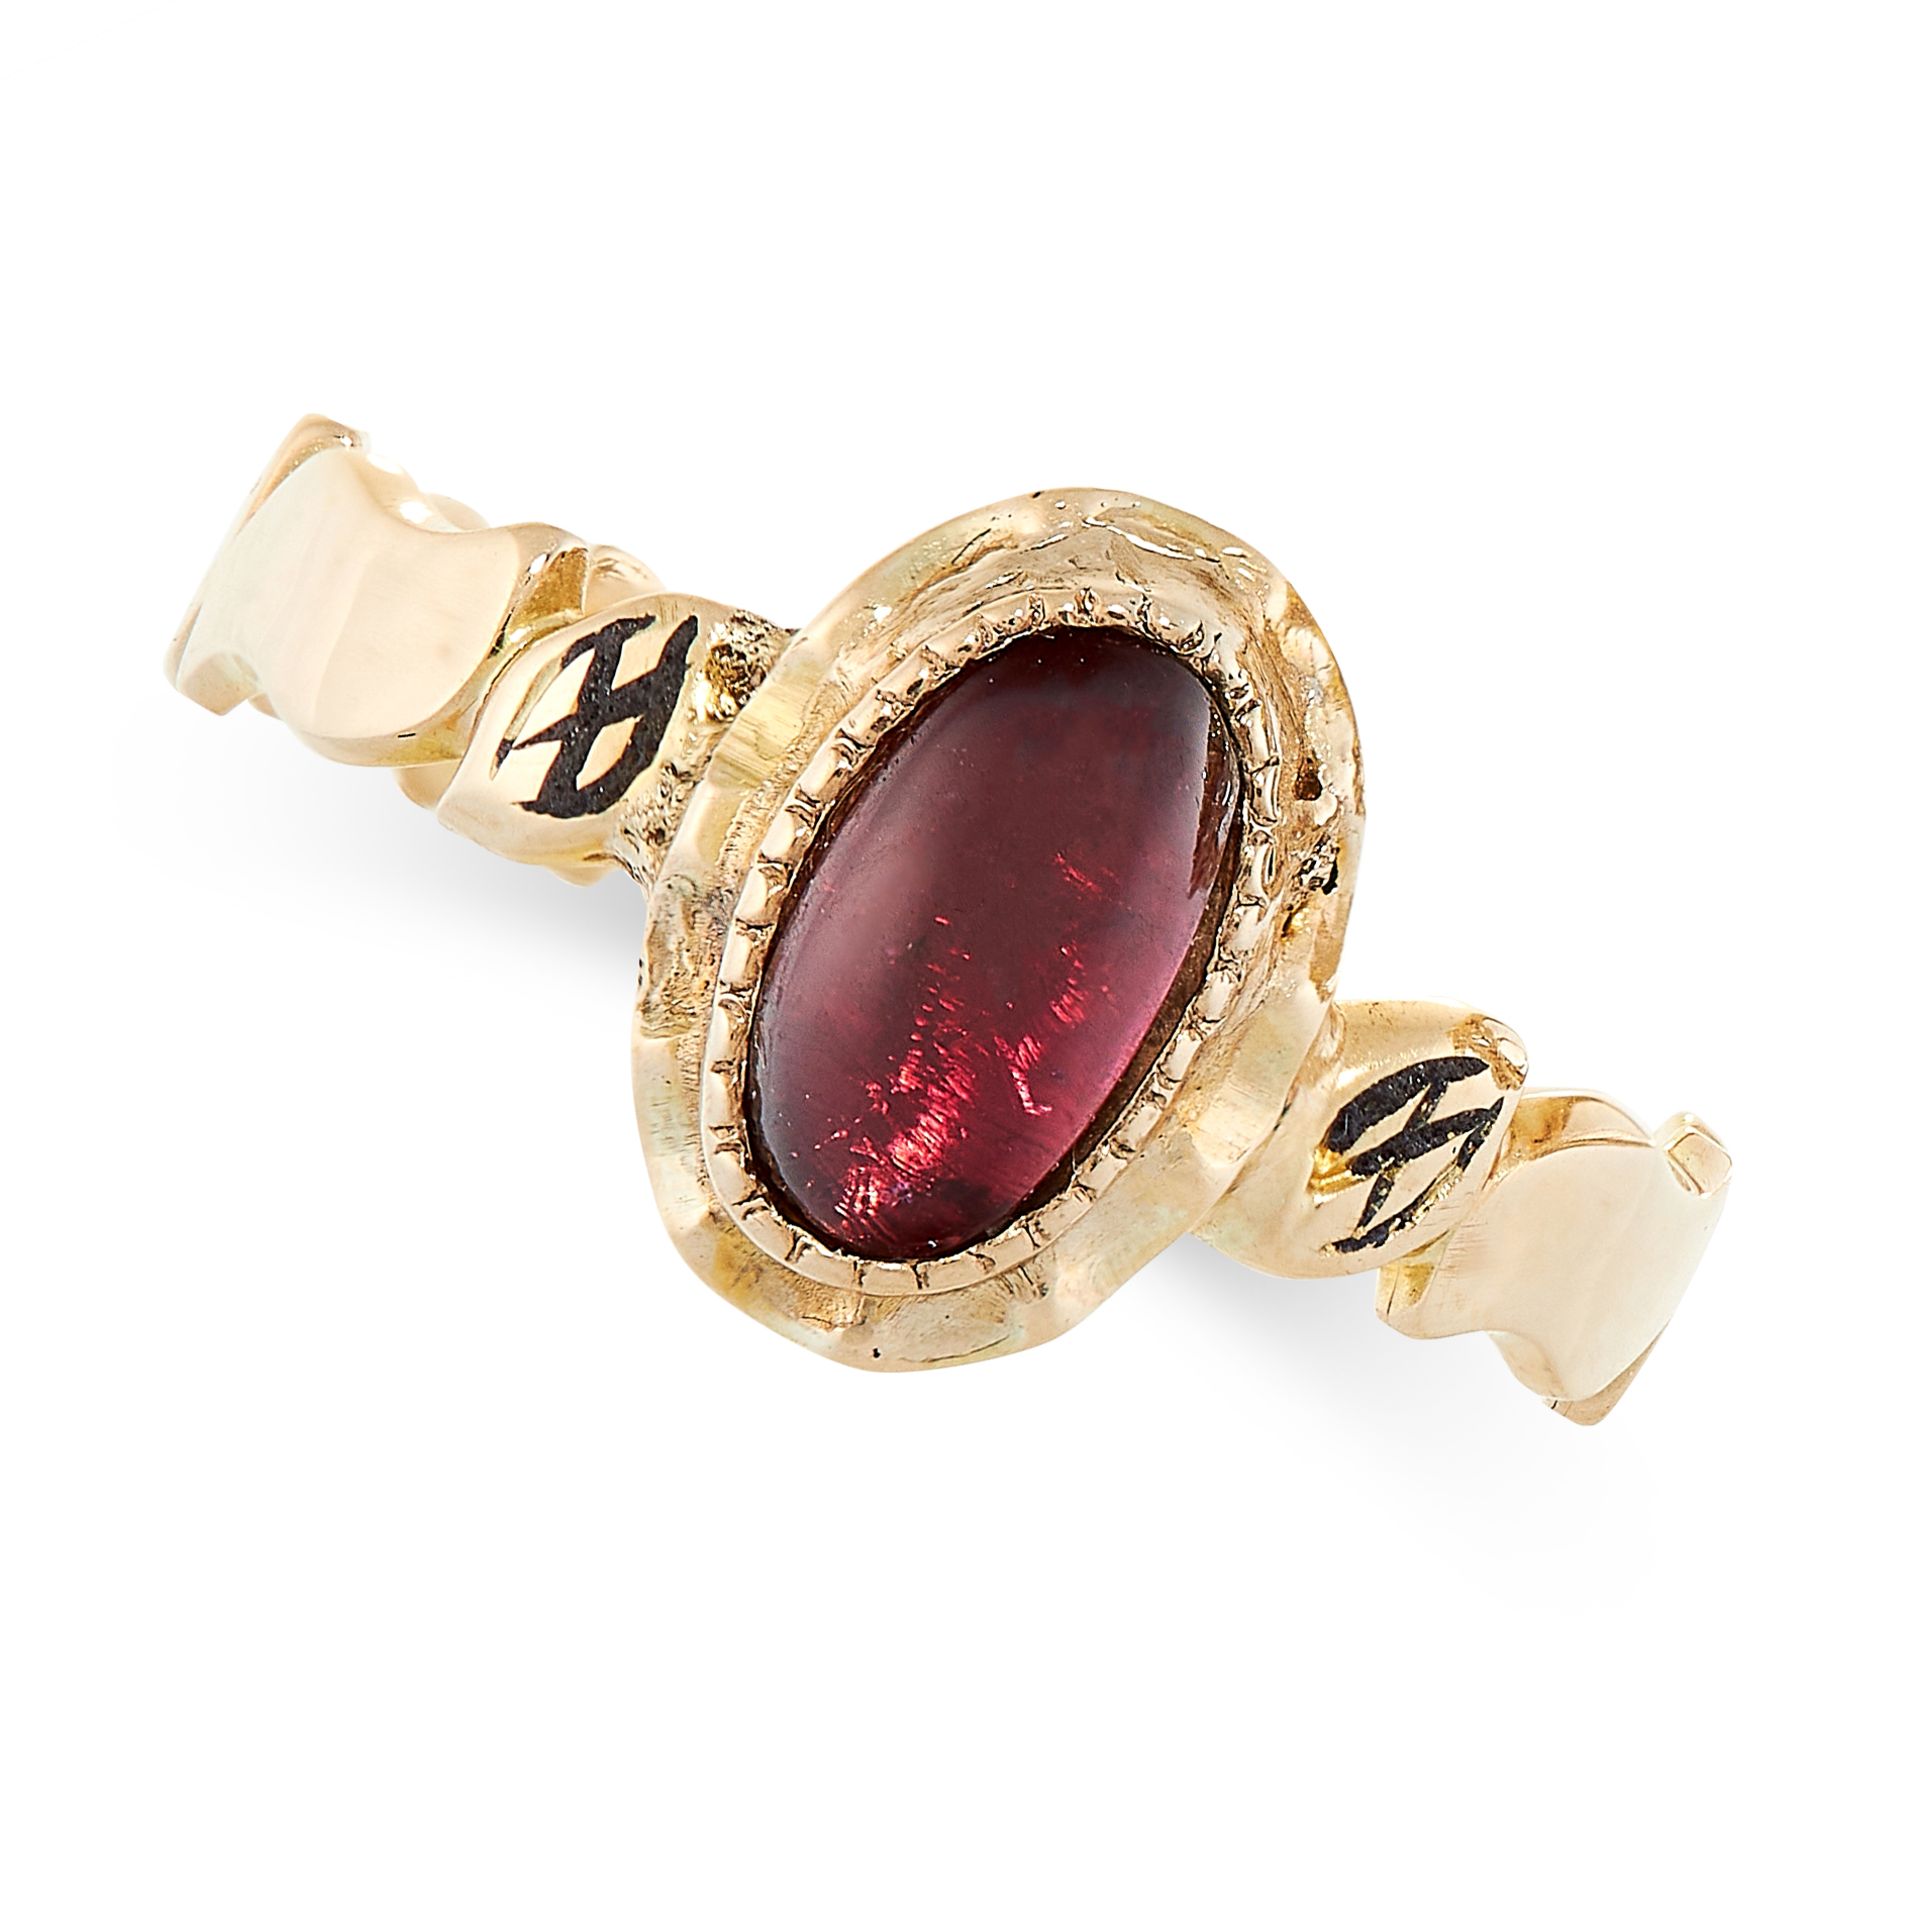 ANTIQUE GARNET AND ENAMEL DRESS RING in 18ct yellow gold, set with an oval cabochon garnet between